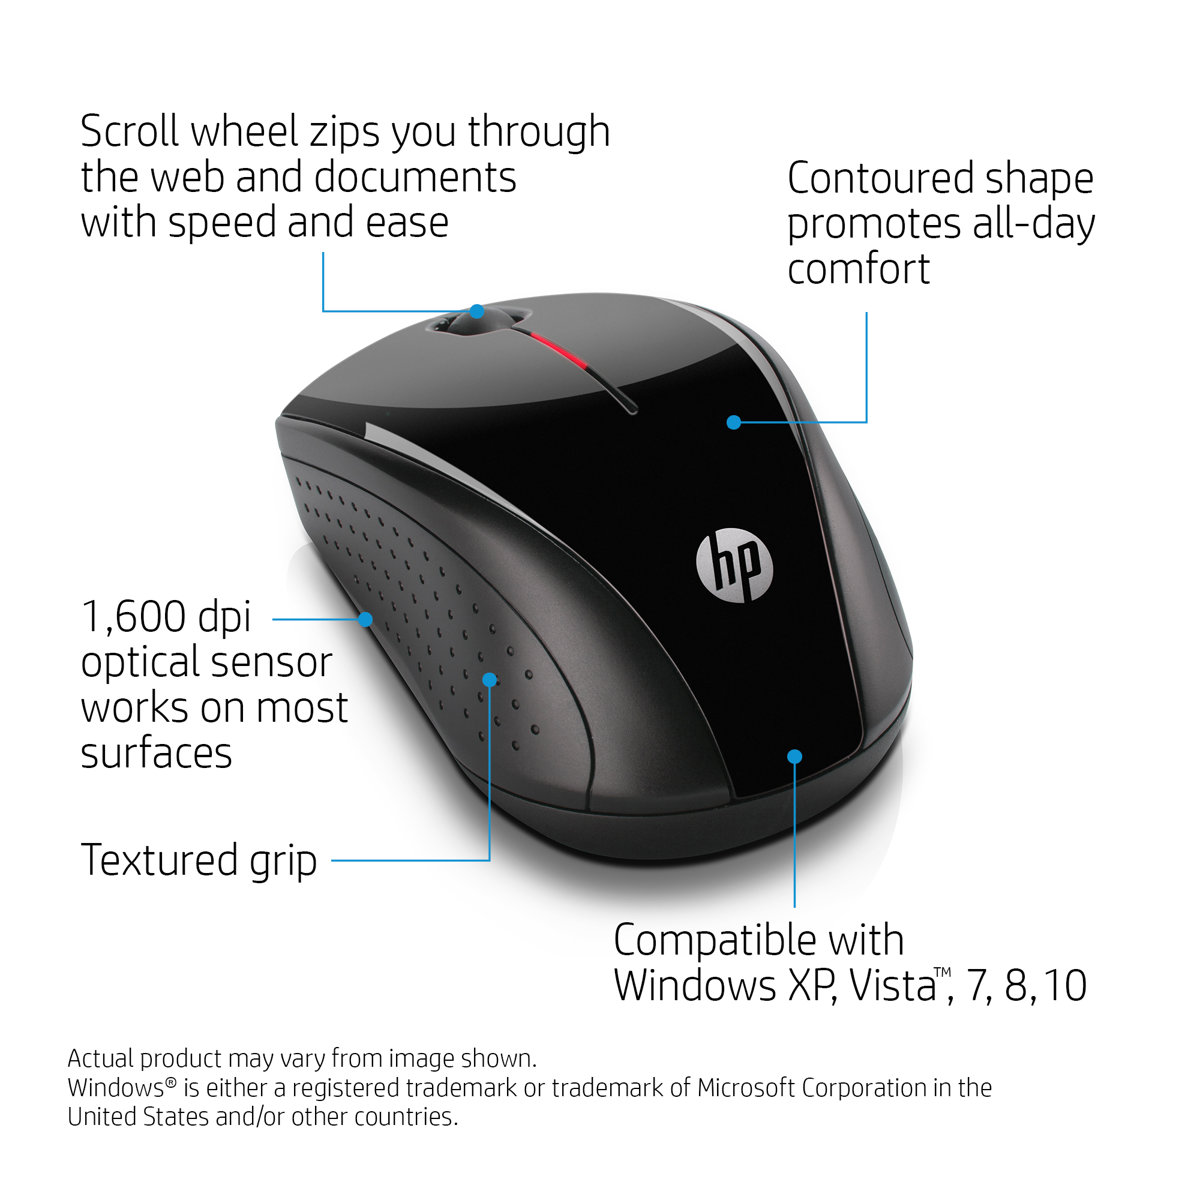 Mouse HP Wireless X3000 (Black) cons